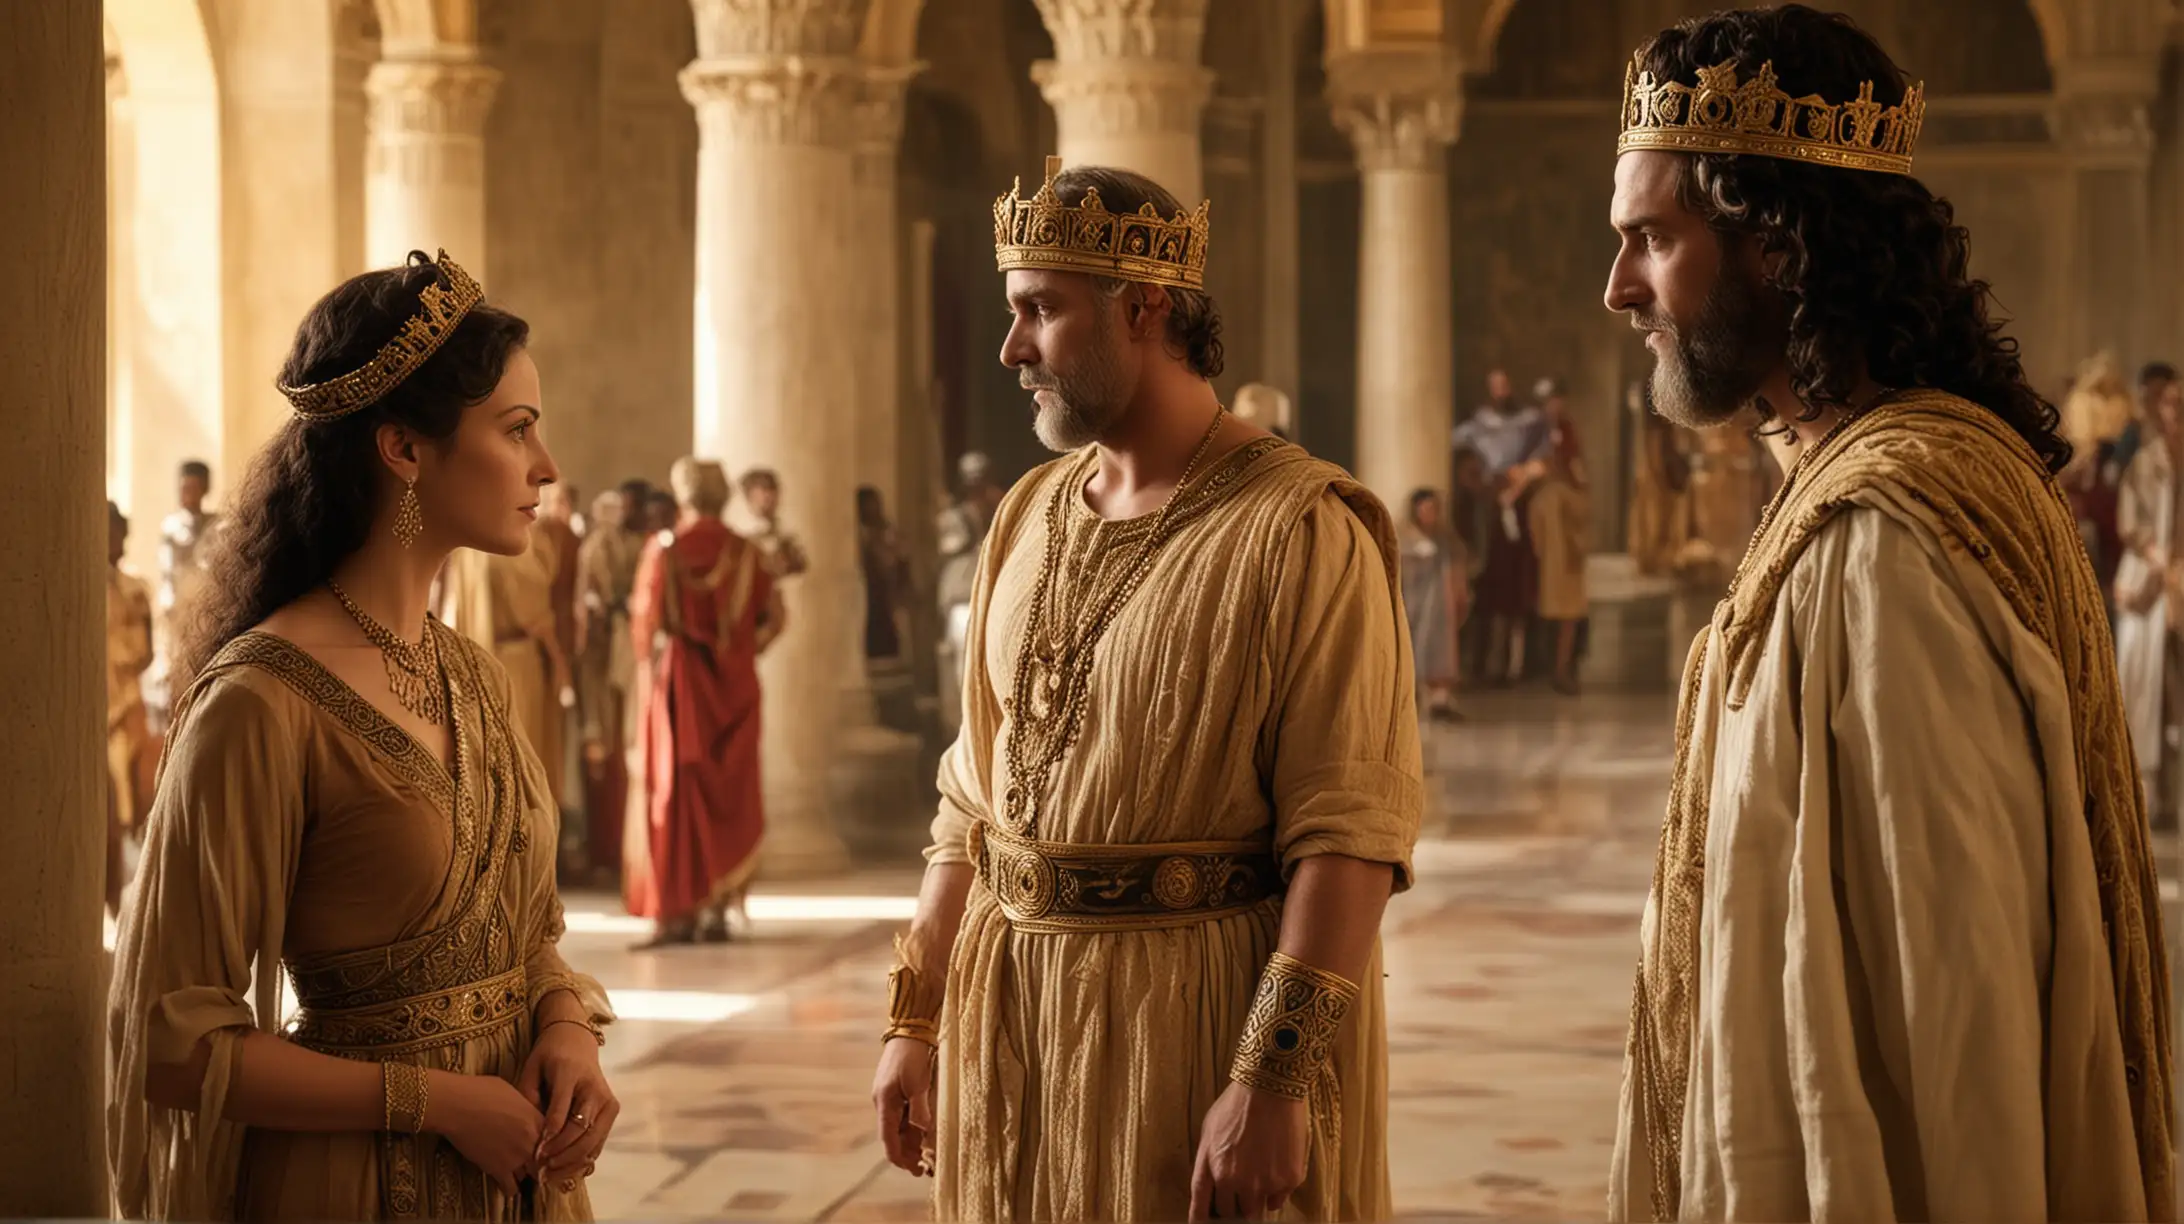 A middle aged handsome King Solomon, talking to the Queen of Sheba in a Palace setting. Set during the Biblical era of King Solomon.